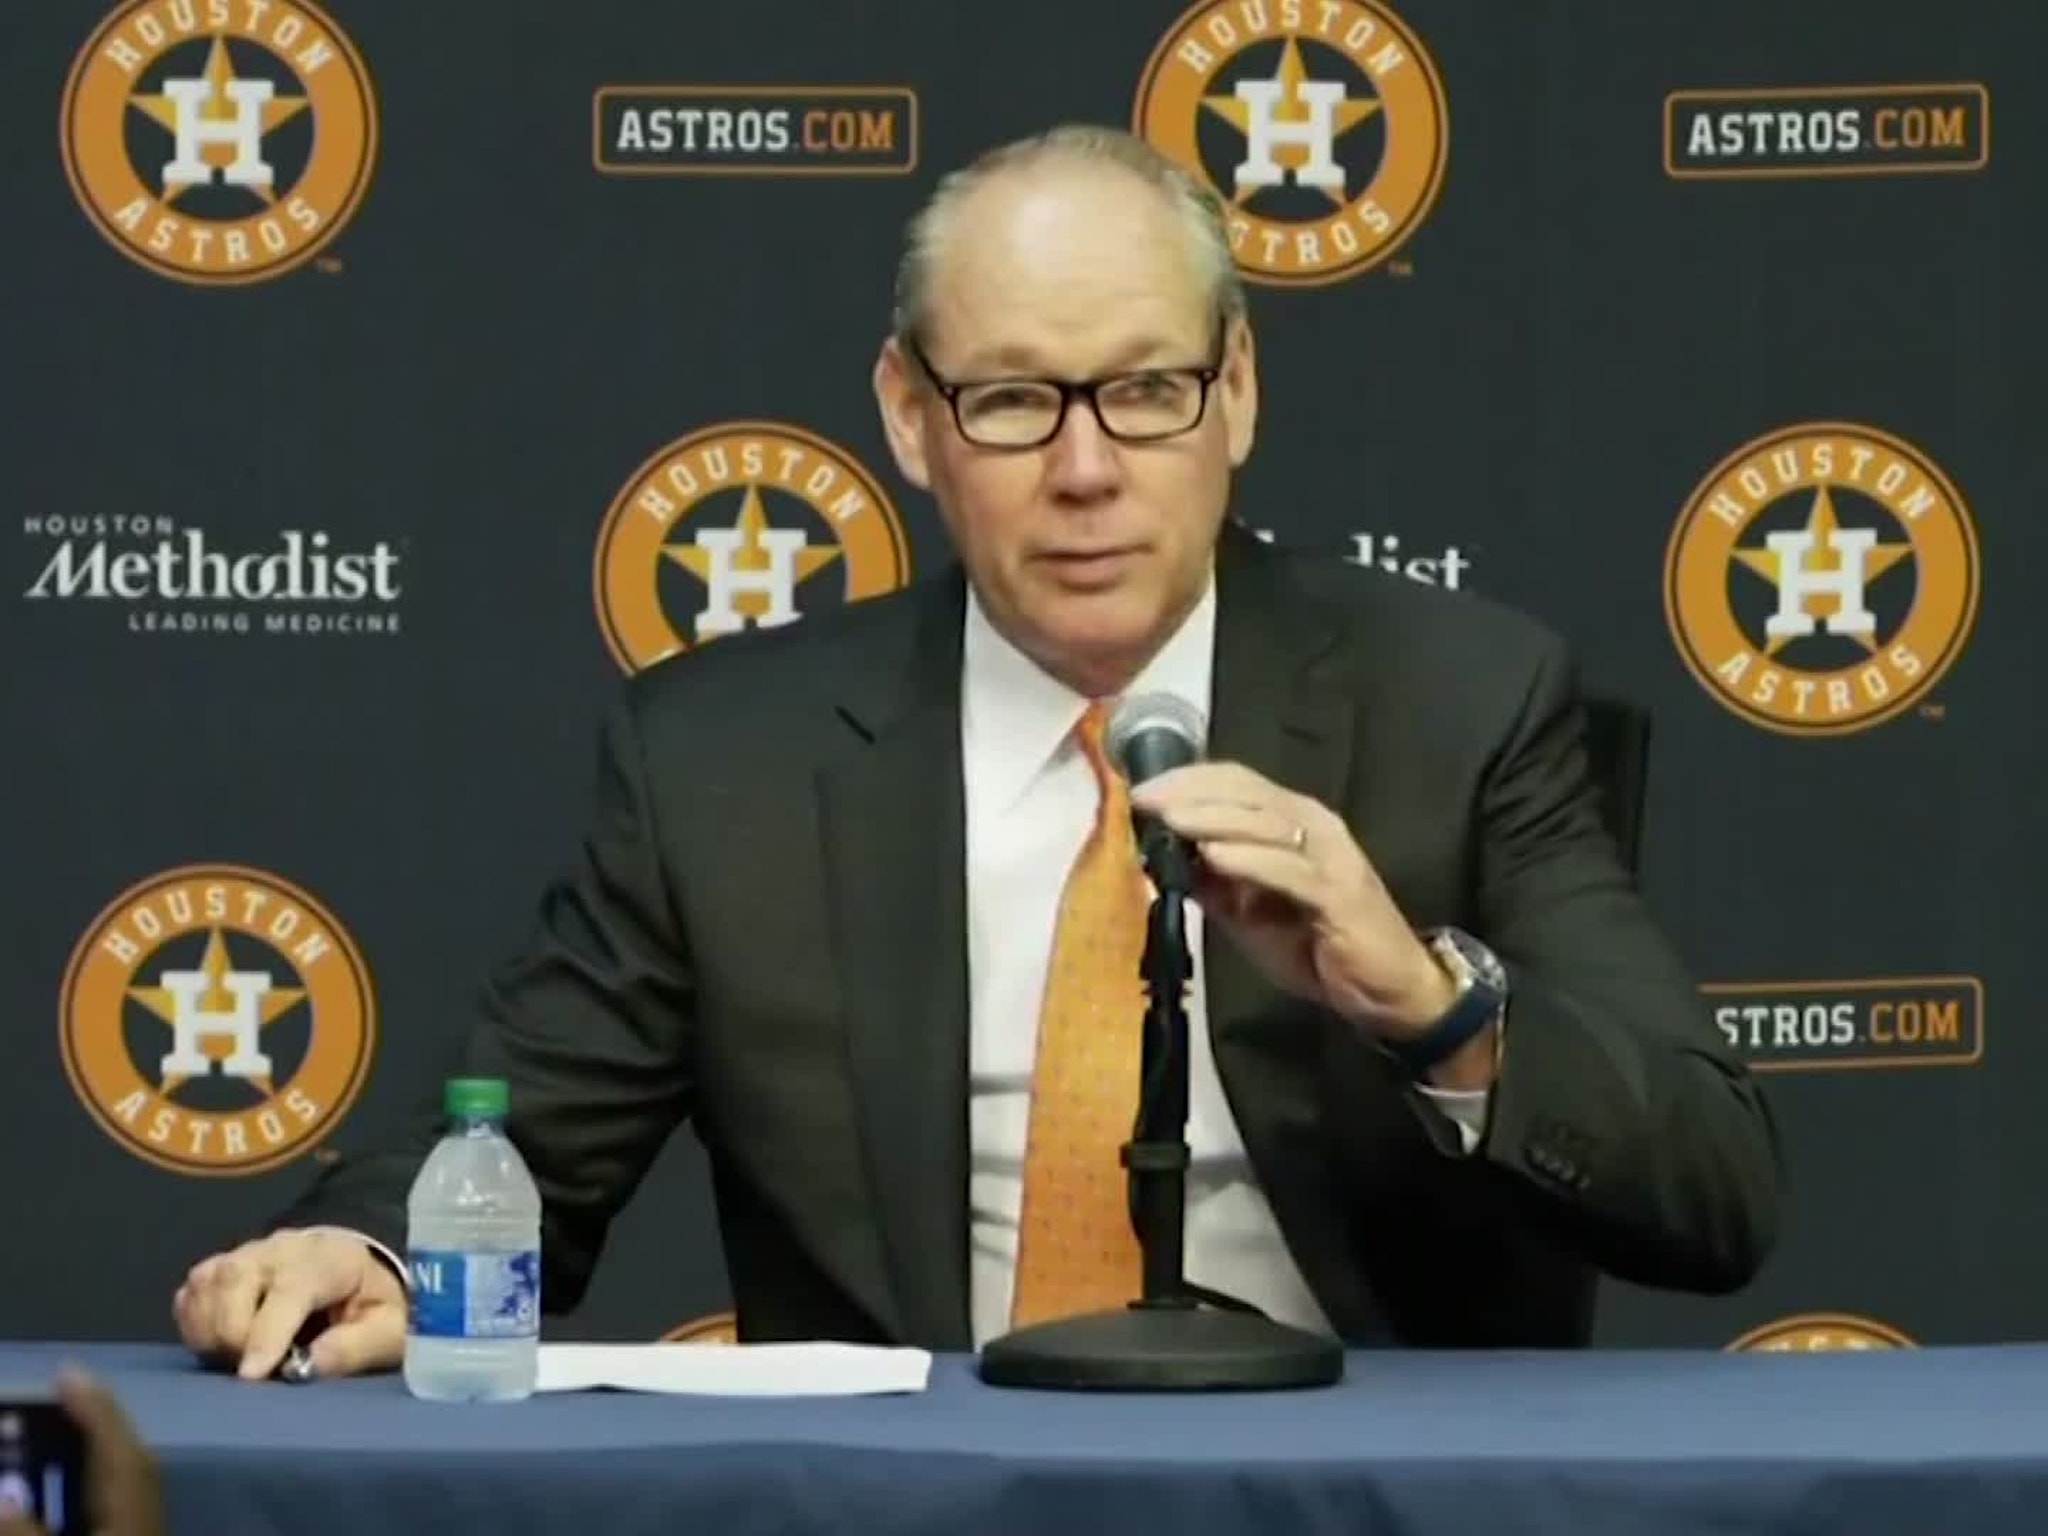 Astros fire manager and GM over cheating scandal